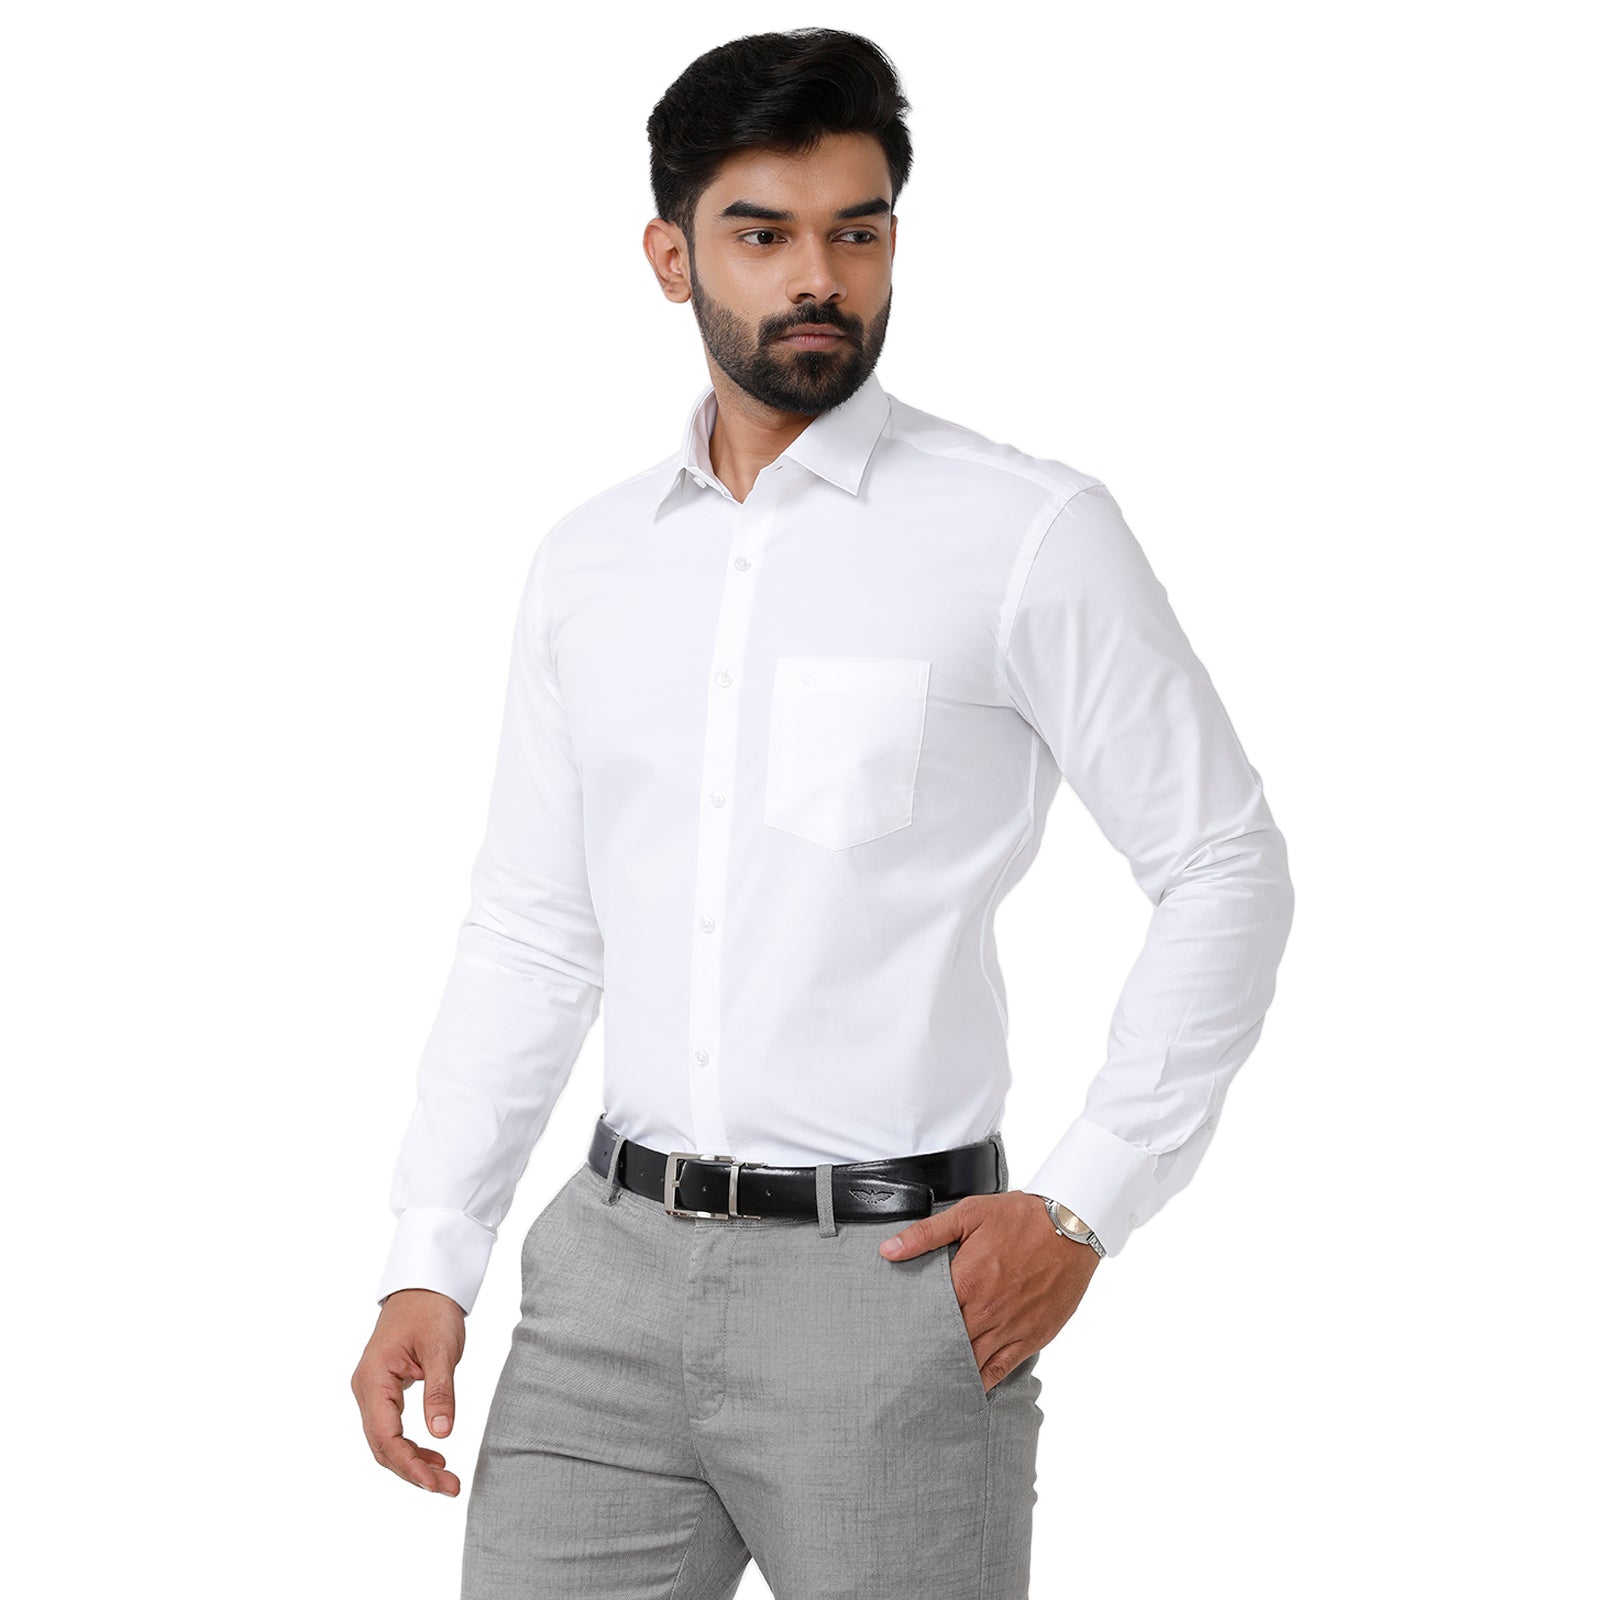 AJ Lifestyle Shirt Pent Fabric Mens wearCottan matirial Shirt Trouser  PairNew Item White  Red  Amazonin Clothing  Accessories